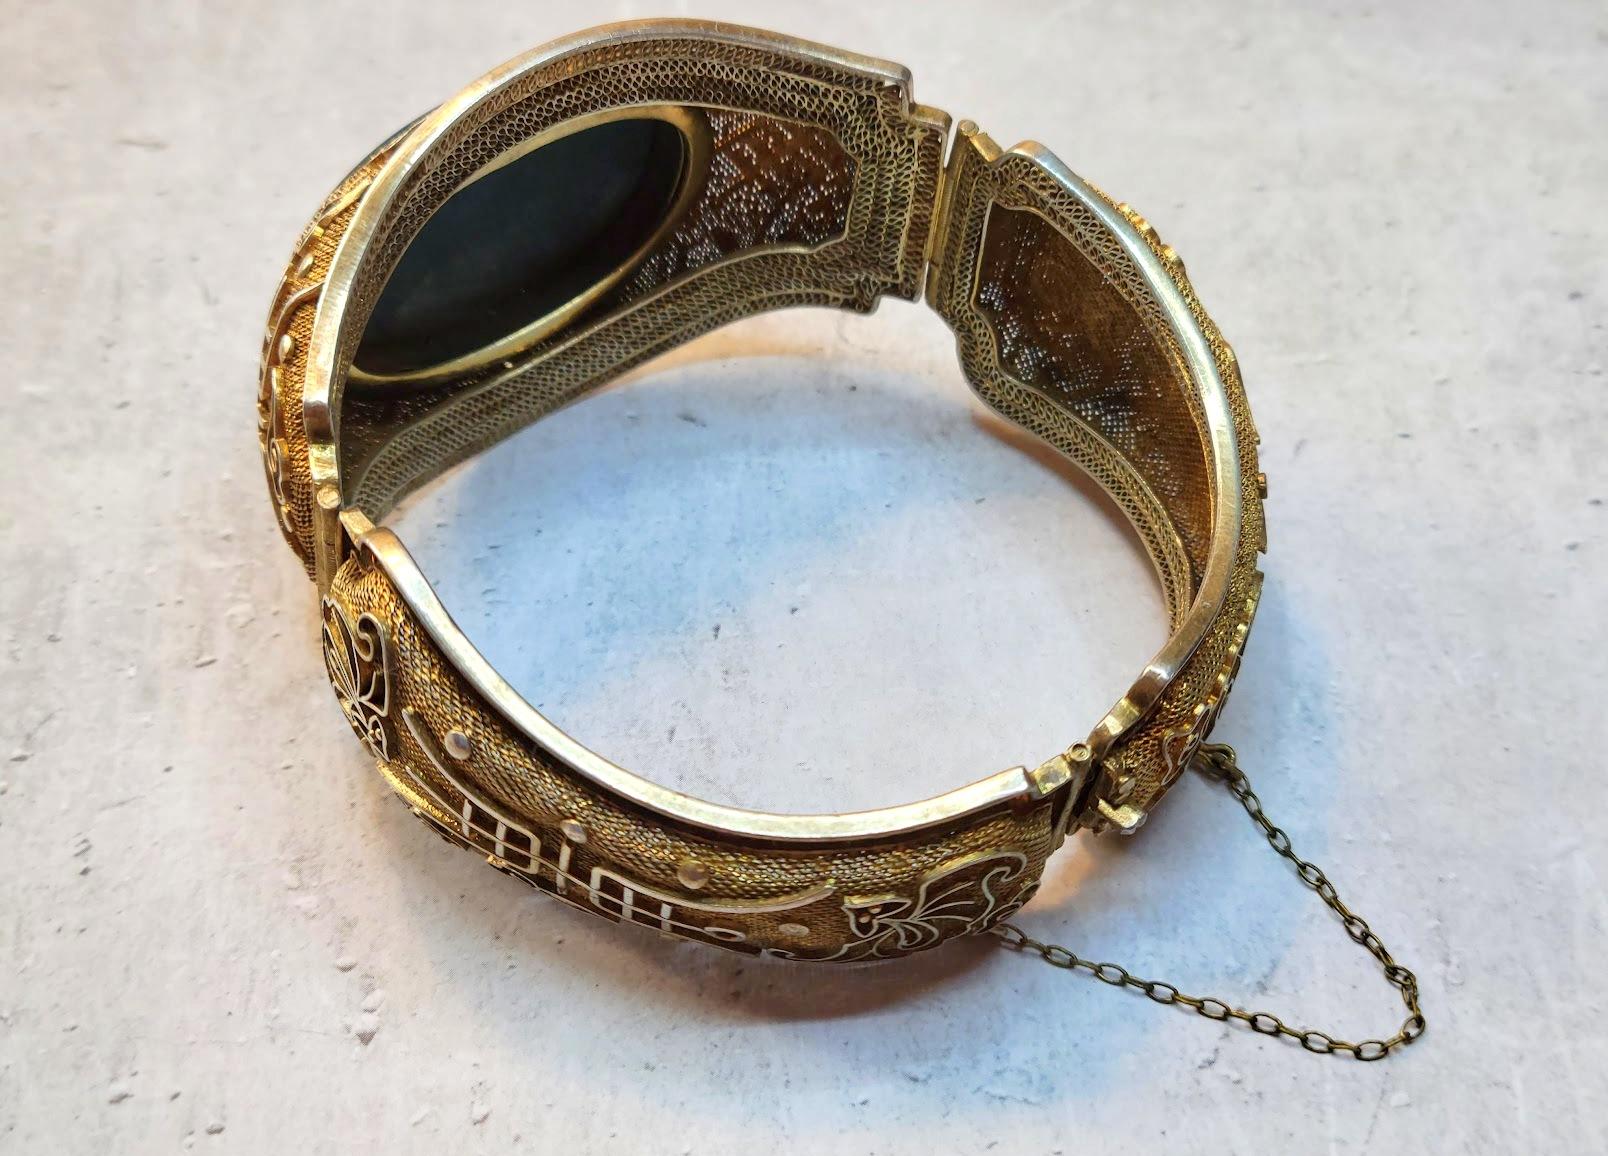 Vintage Chinese Export Filigree Gilded Silver Bracelet With Bloodstone Cabochon In Good Condition For Sale In Chesterland, OH